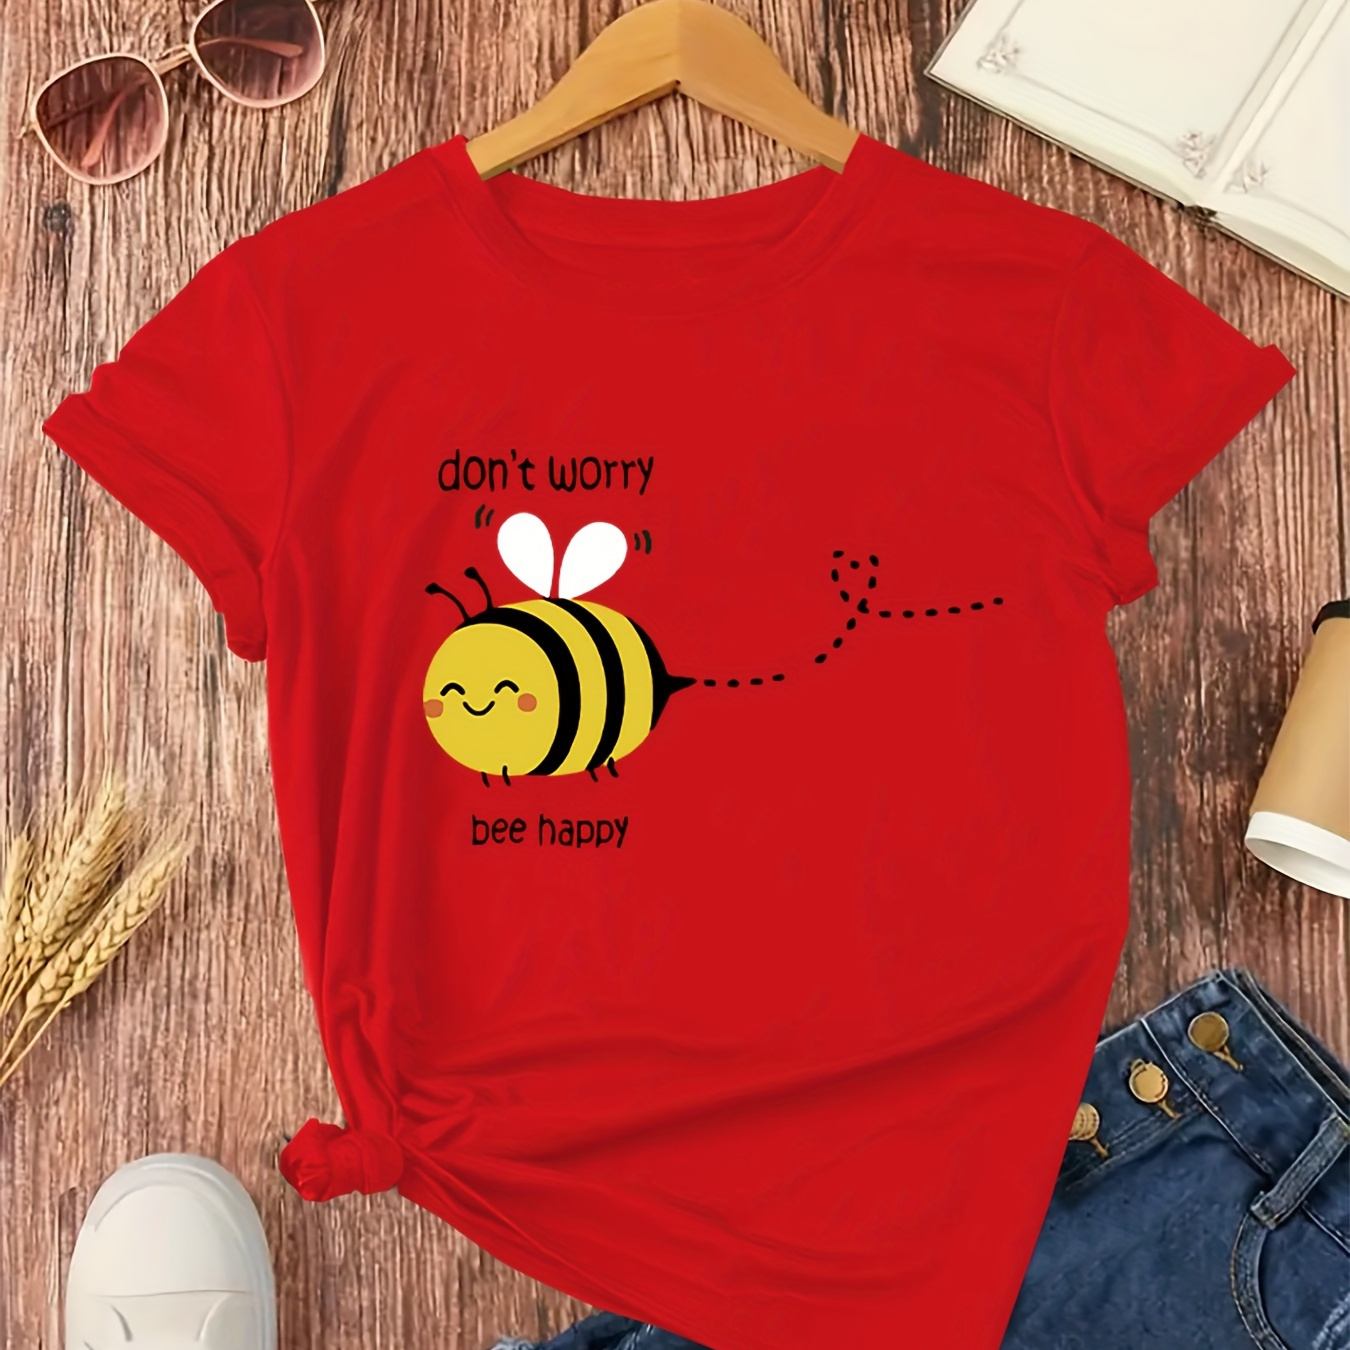 

Plus Size Bee & Letter Print T-shirt, Casual Short Sleeve Top For Spring & Summer, Women's Plus Size Clothing